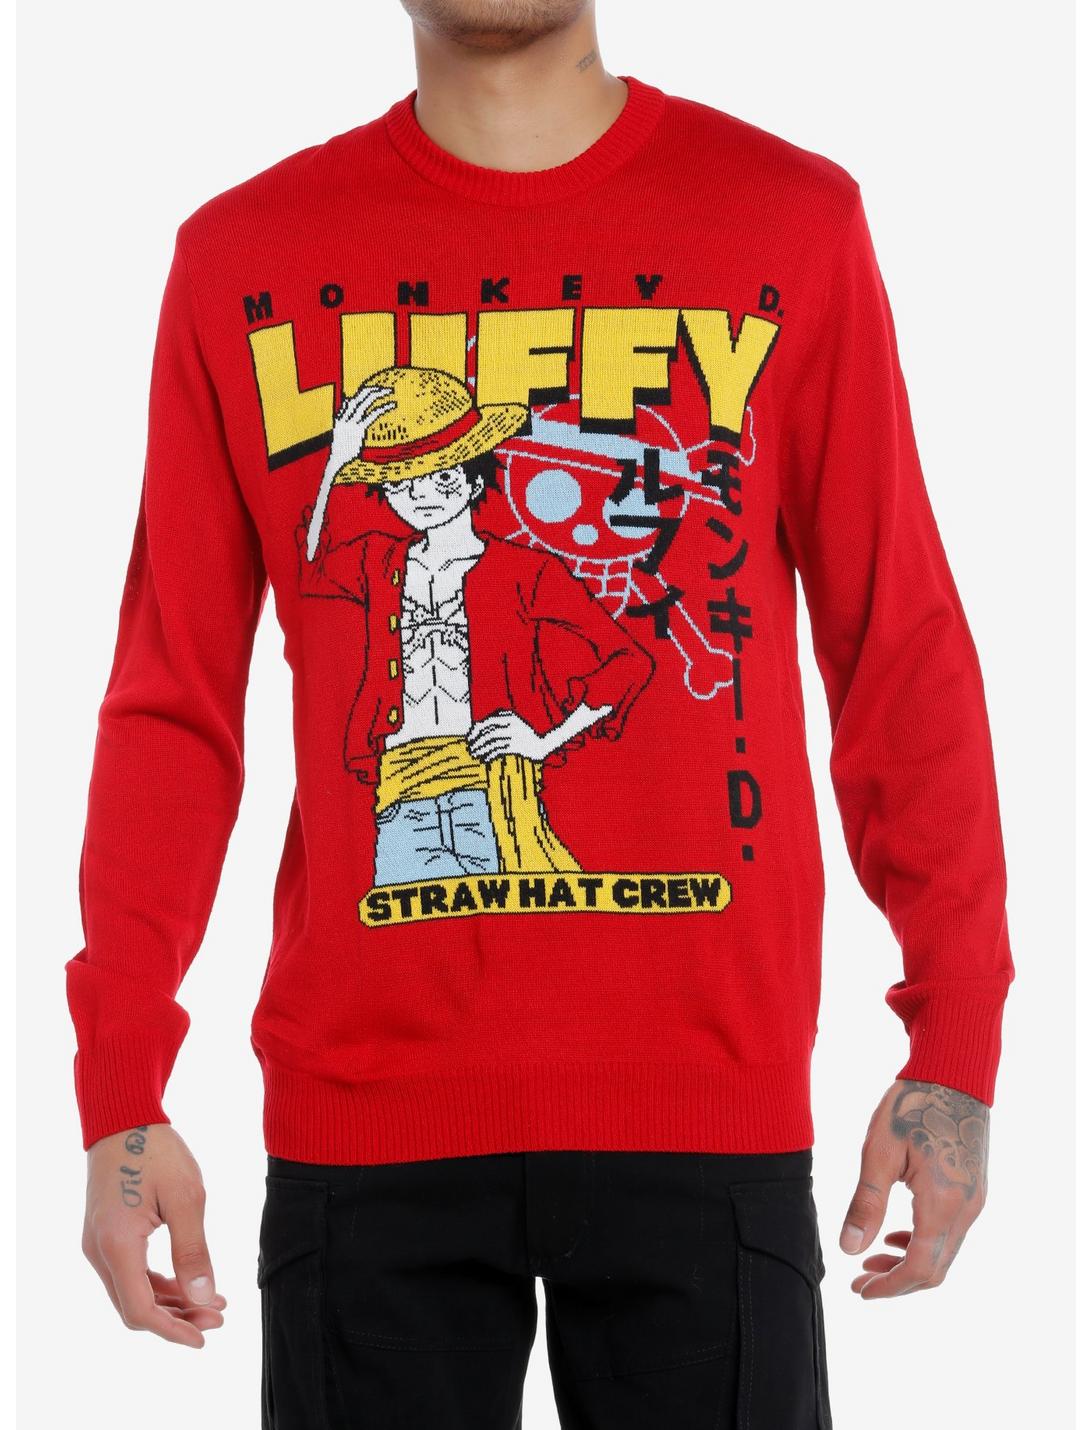 One Piece Luffy Intarsia Knit Sweater, RED, hi-res